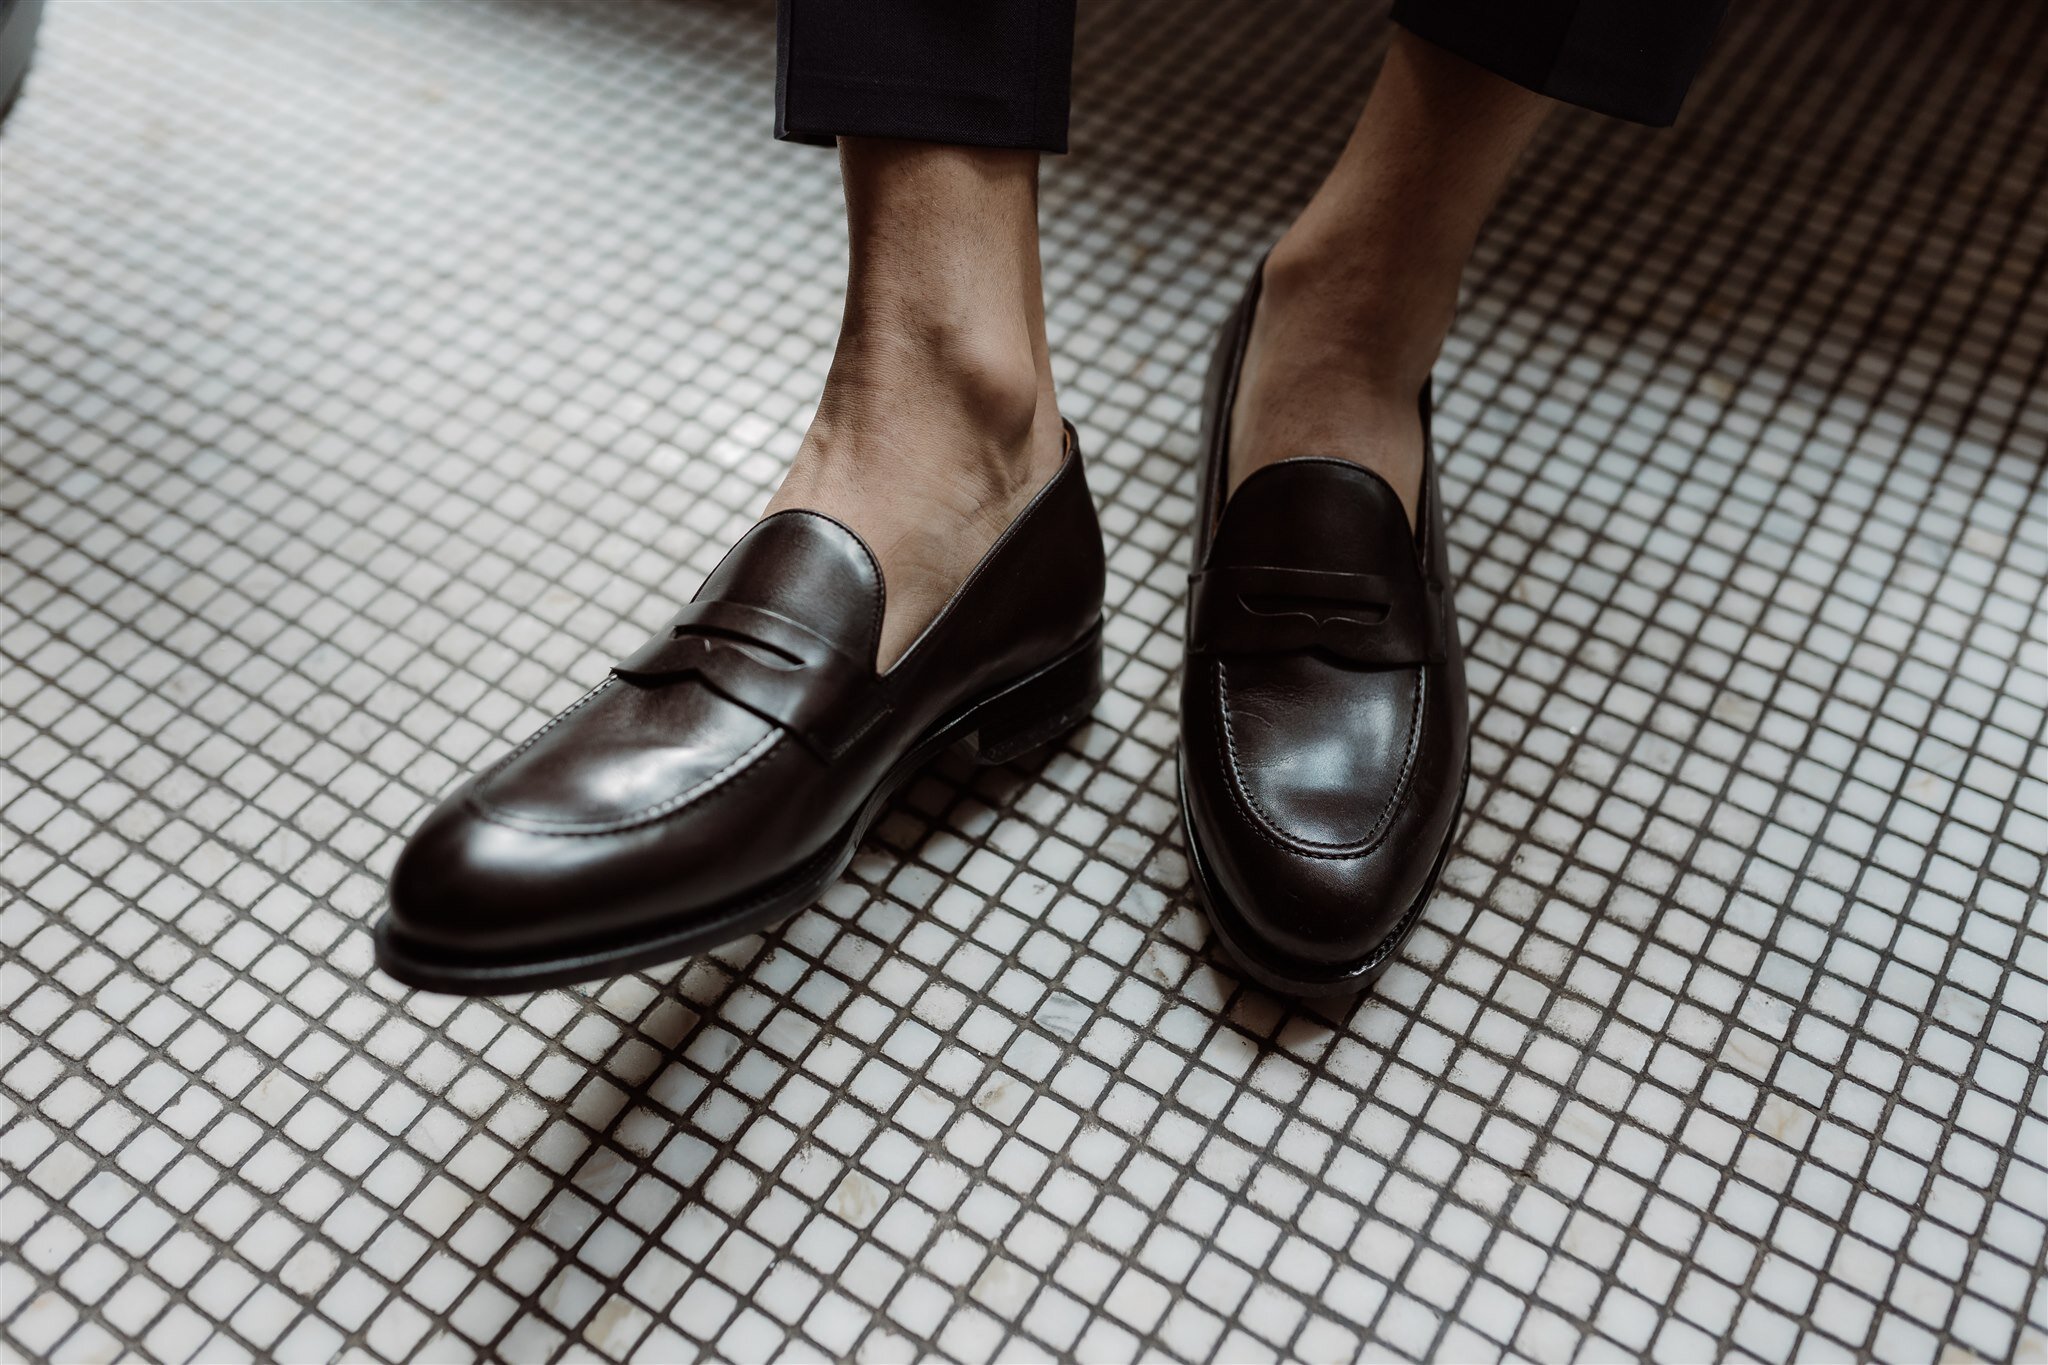 Top 5 shoes to match a suit - Blandin & Delloye